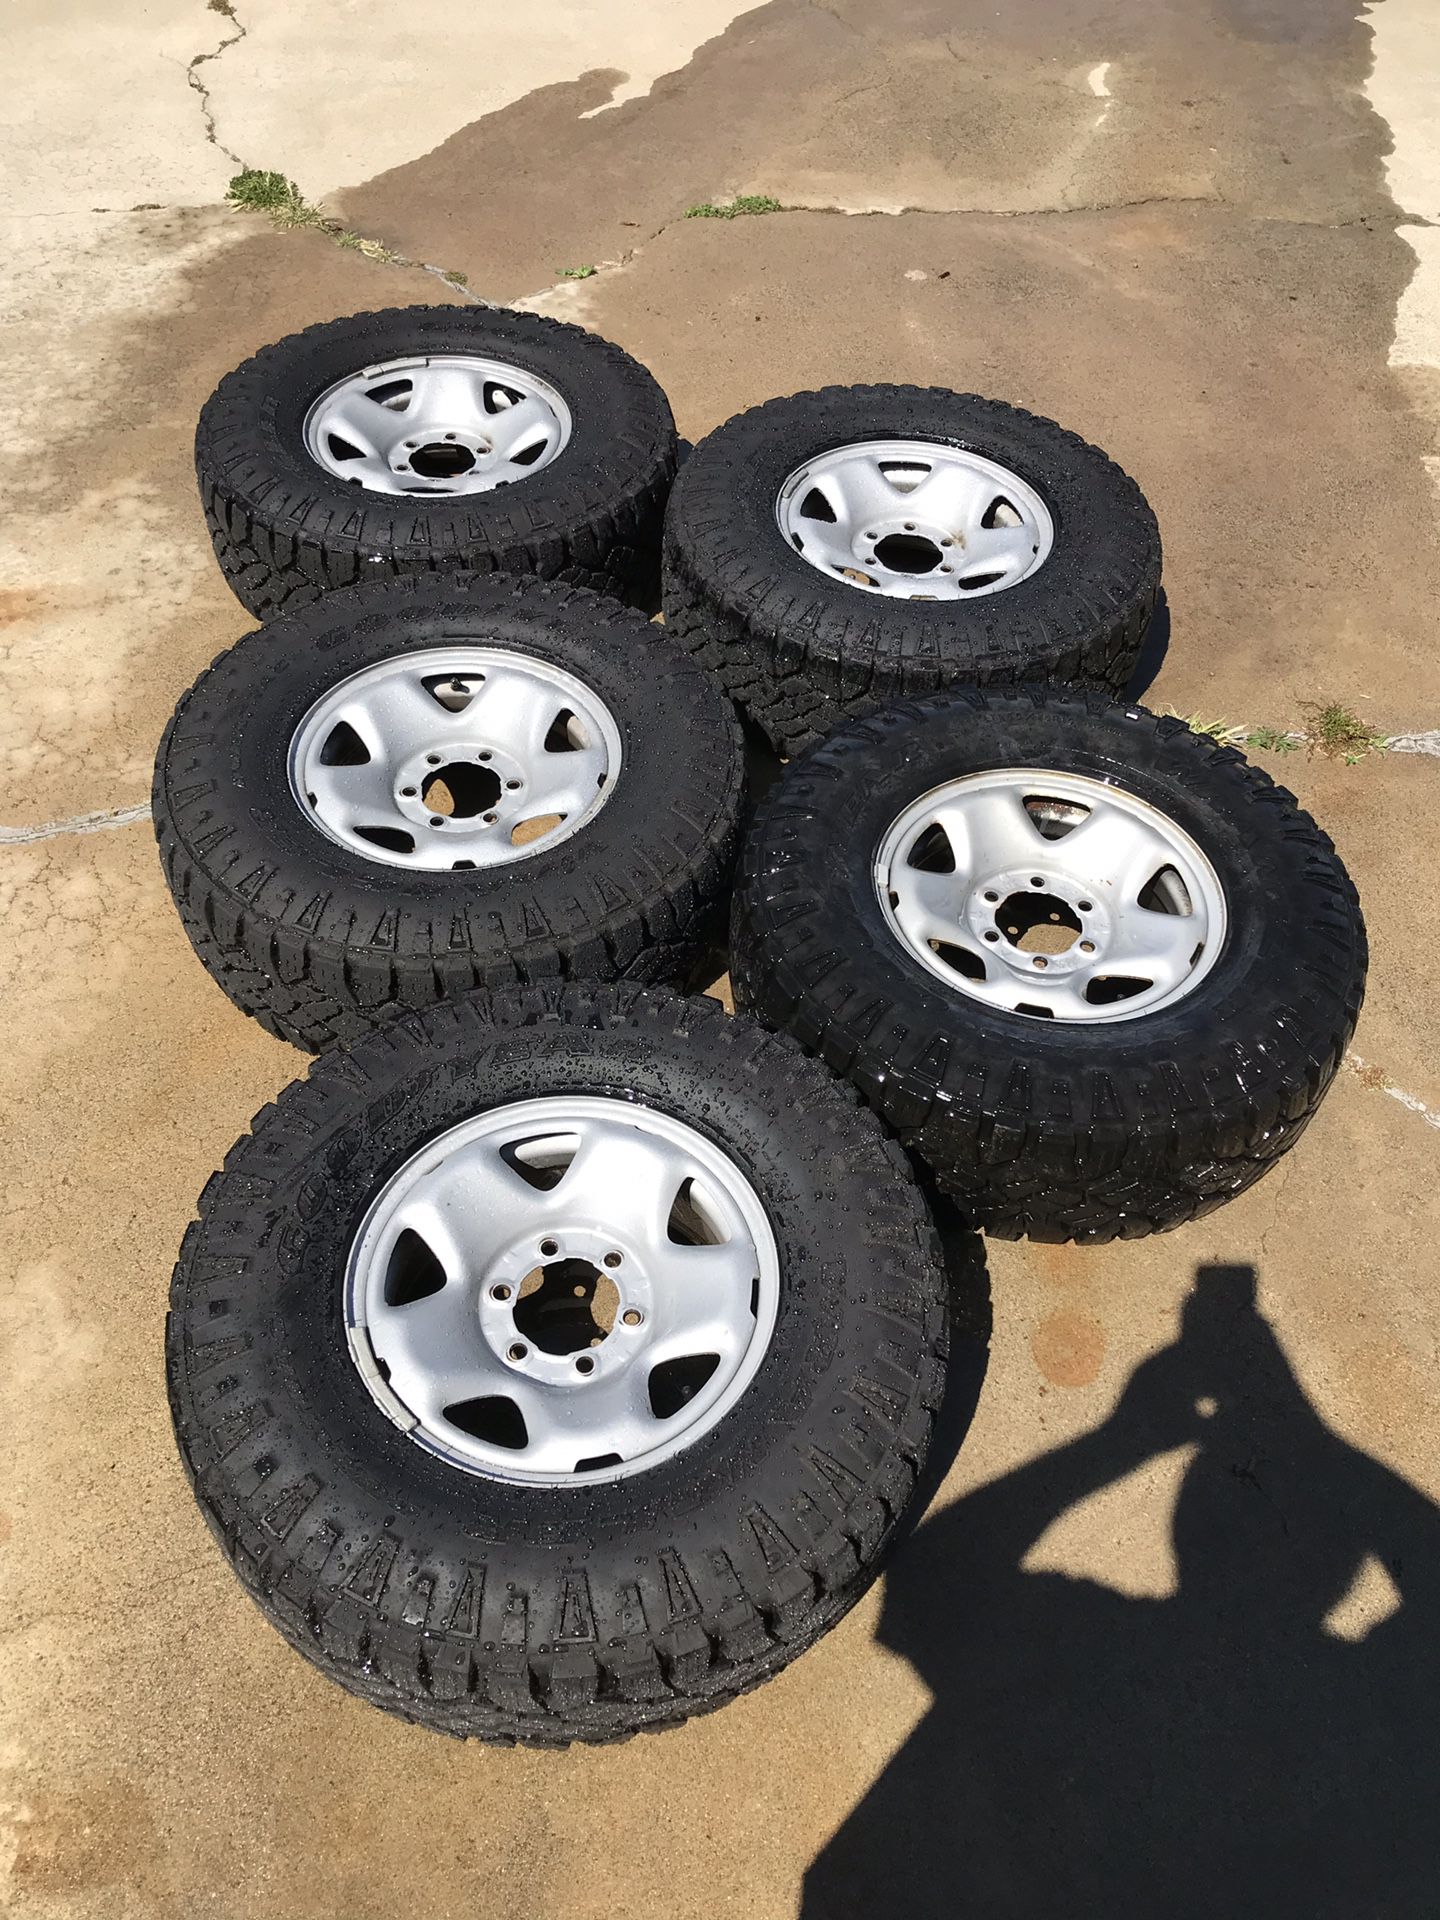 Goodyear wrangler dura track all terrain Toyota Tacoma tires wheels  off-road for Sale in Oceanside, CA - OfferUp